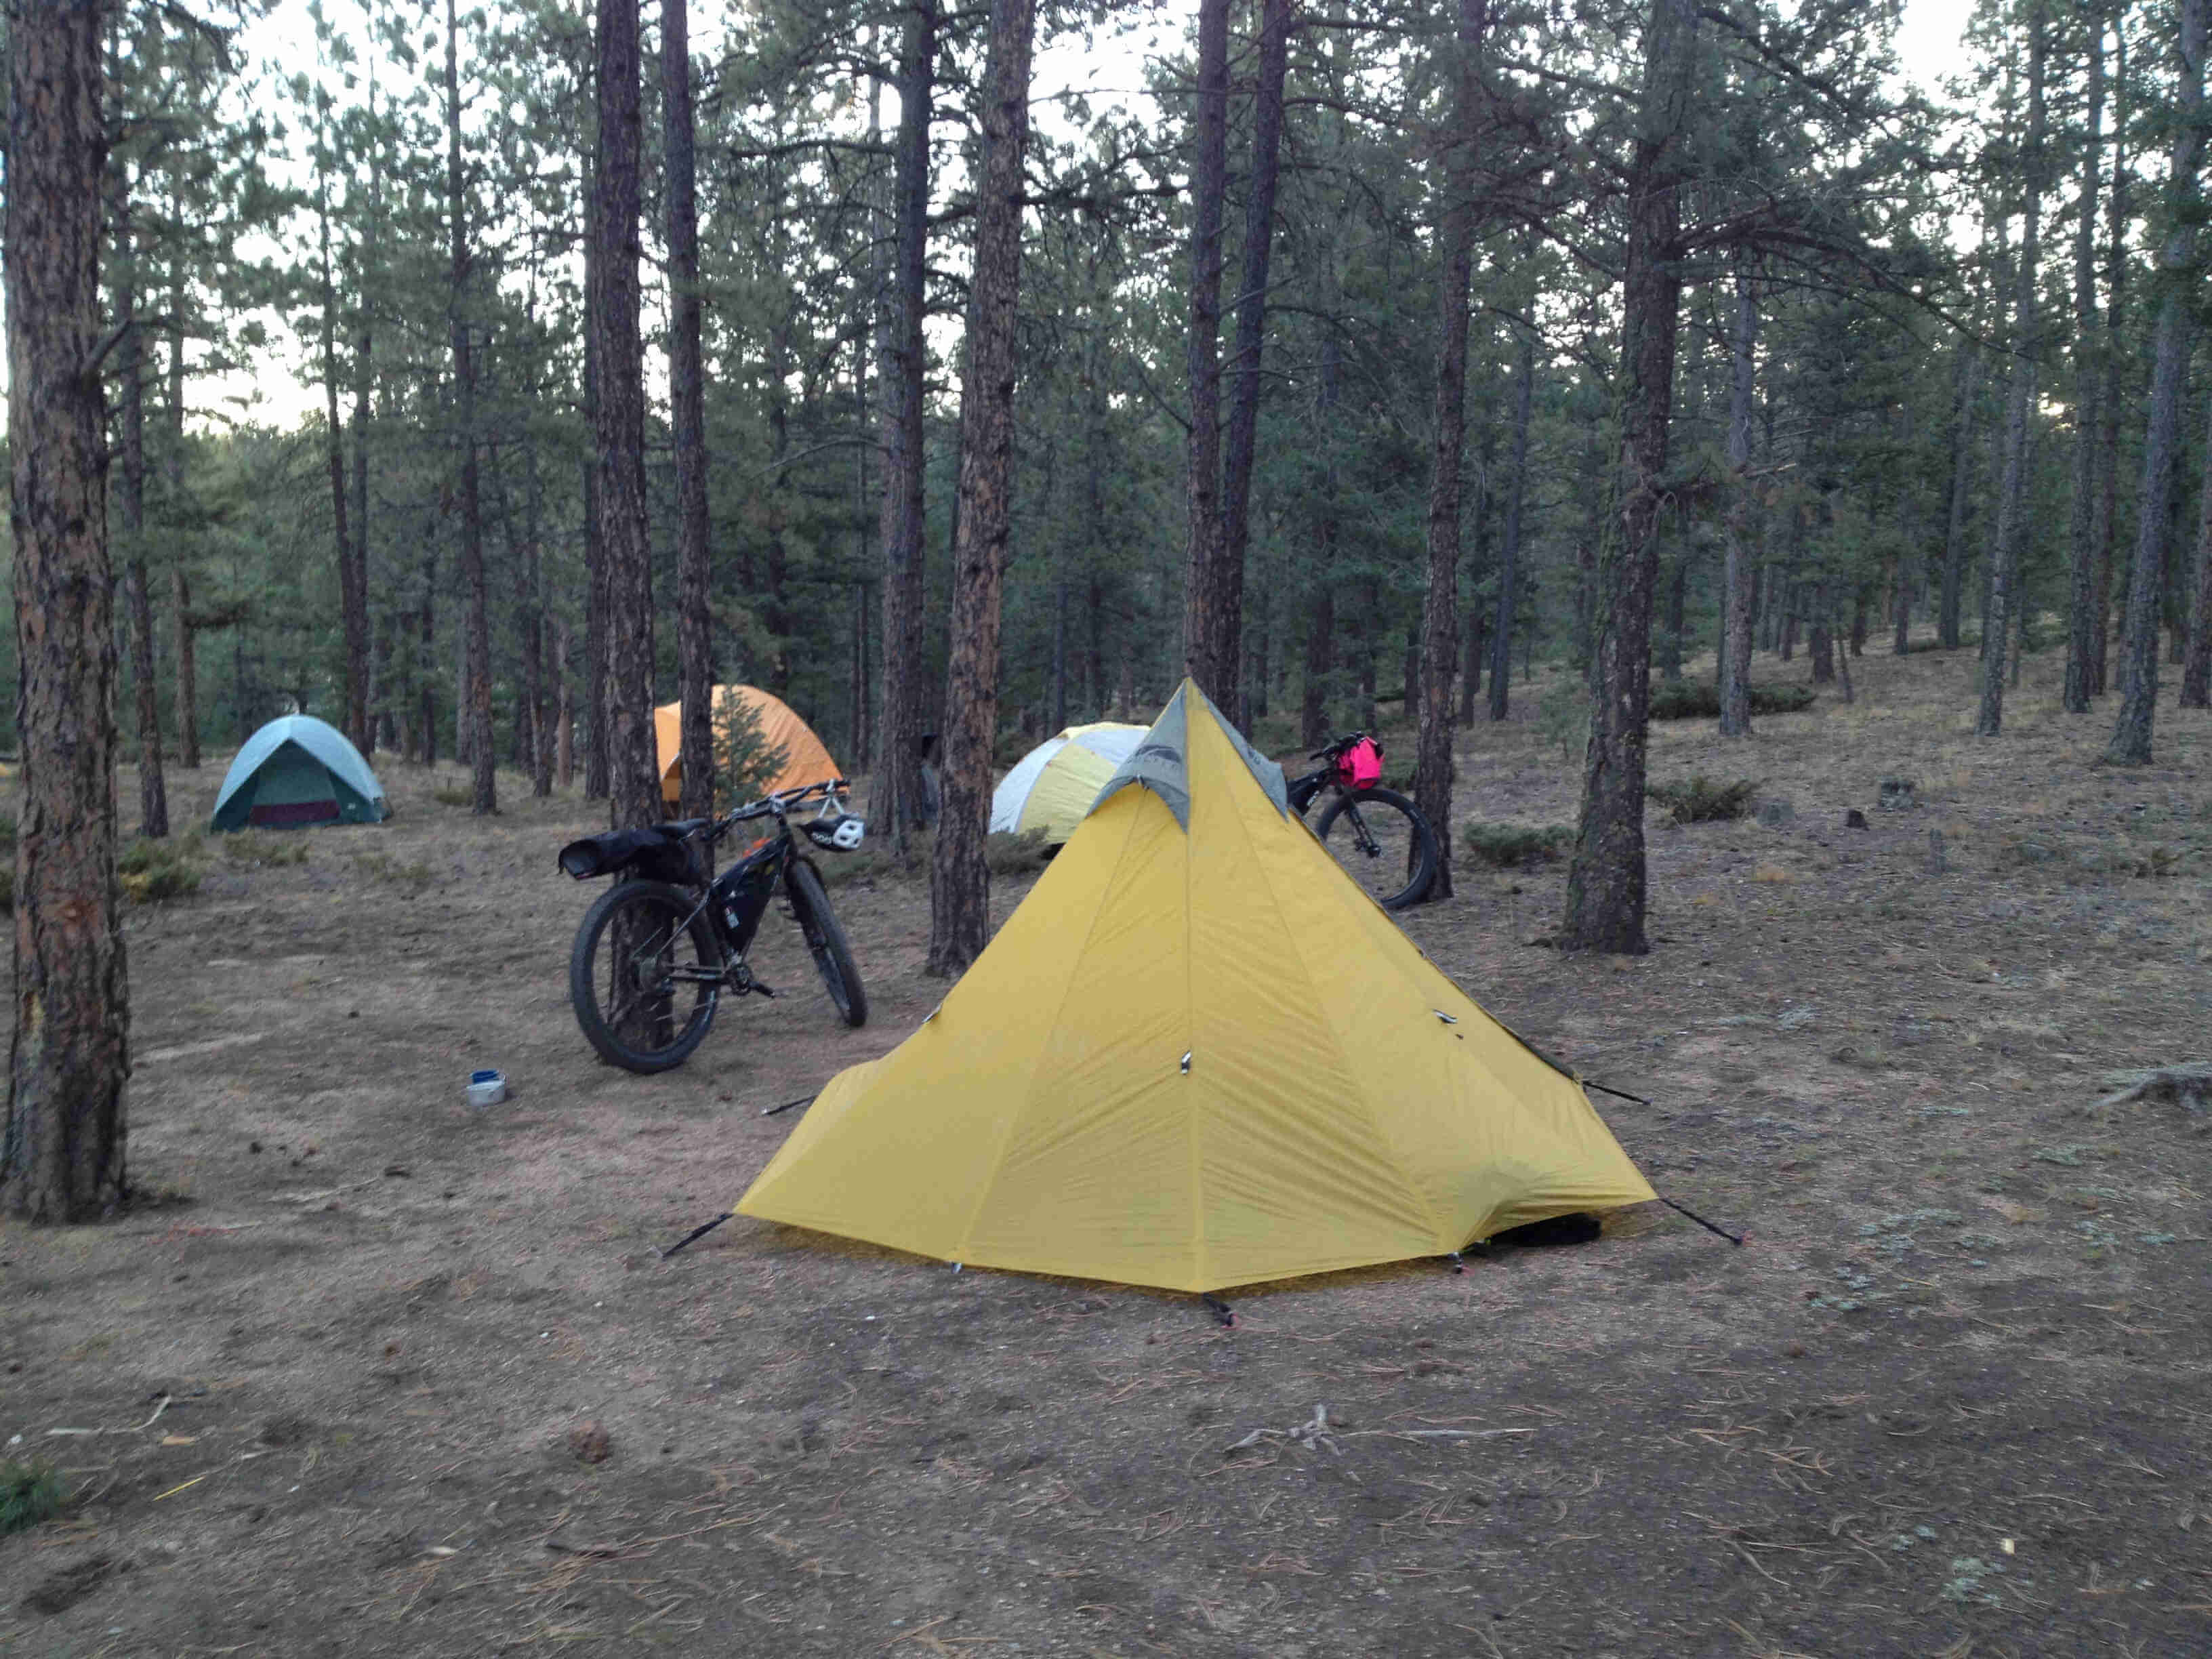 Right side view of a Surly bike with gear, leaning against a tree next to a yellow tent, on a clearing in a forest